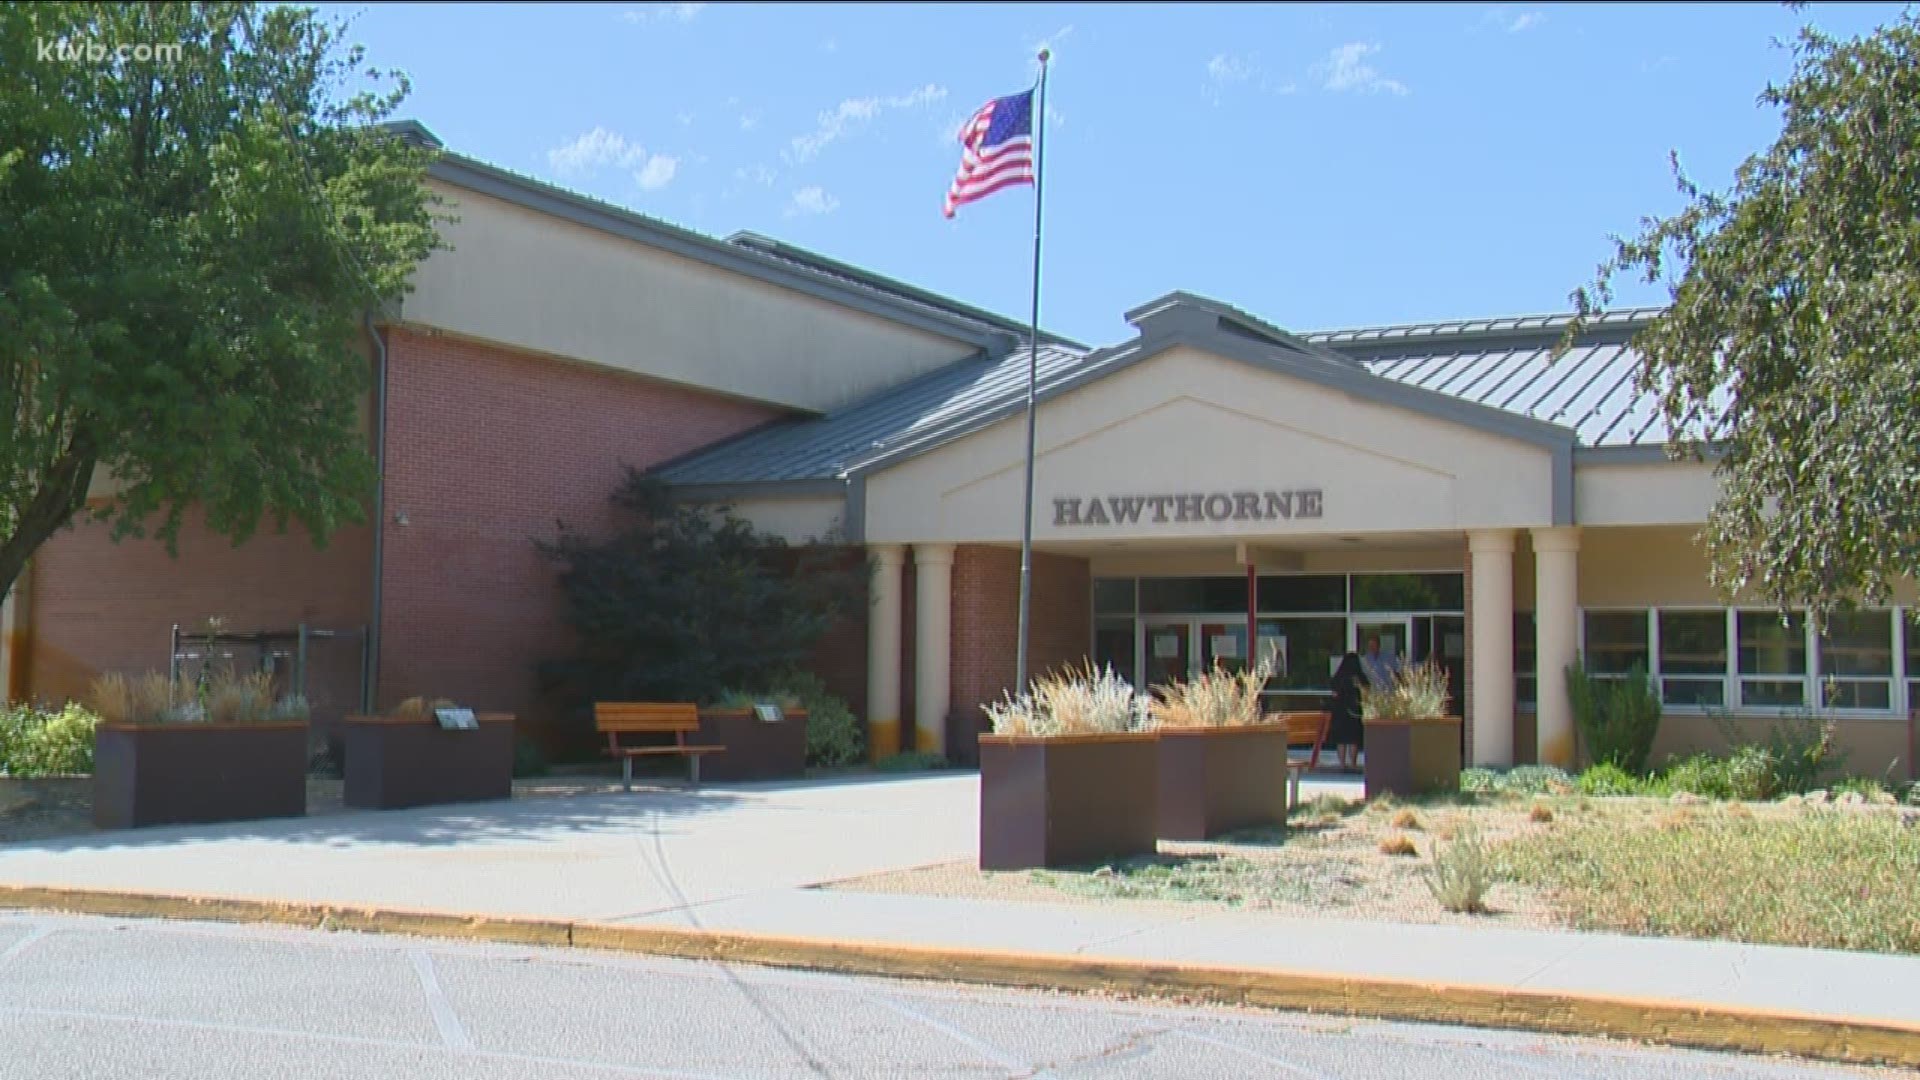 A text message went out to City of Boise employees alerting them about an active shooter at Hawthorne Elementary School.